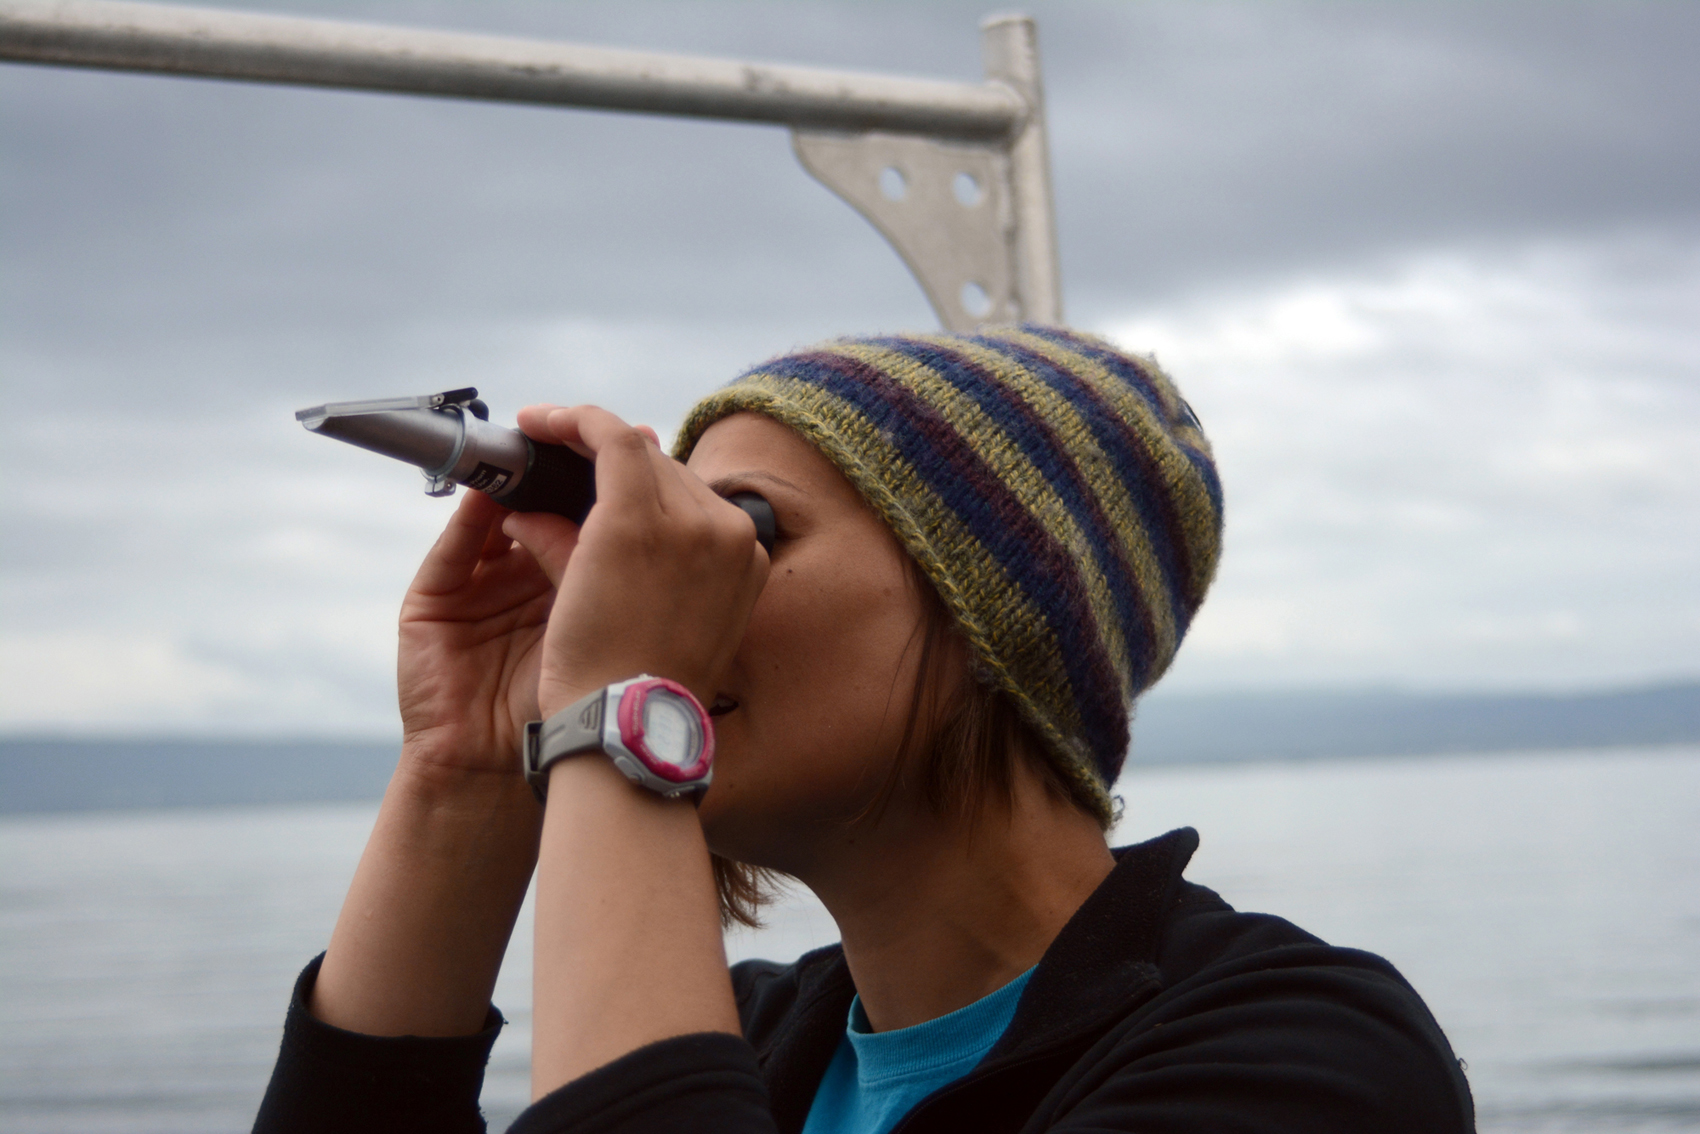 Becca Matthias, a naturalist for the Center for Alaskan Coastal Studies, looks through a refractometer to measure salinity in an ocean water sample taken during a recent tour. The CACS tours, offered on Thursdays, are an opportunity to combine science and sightseeing.-Photo by Michael Armstrong, Homer News